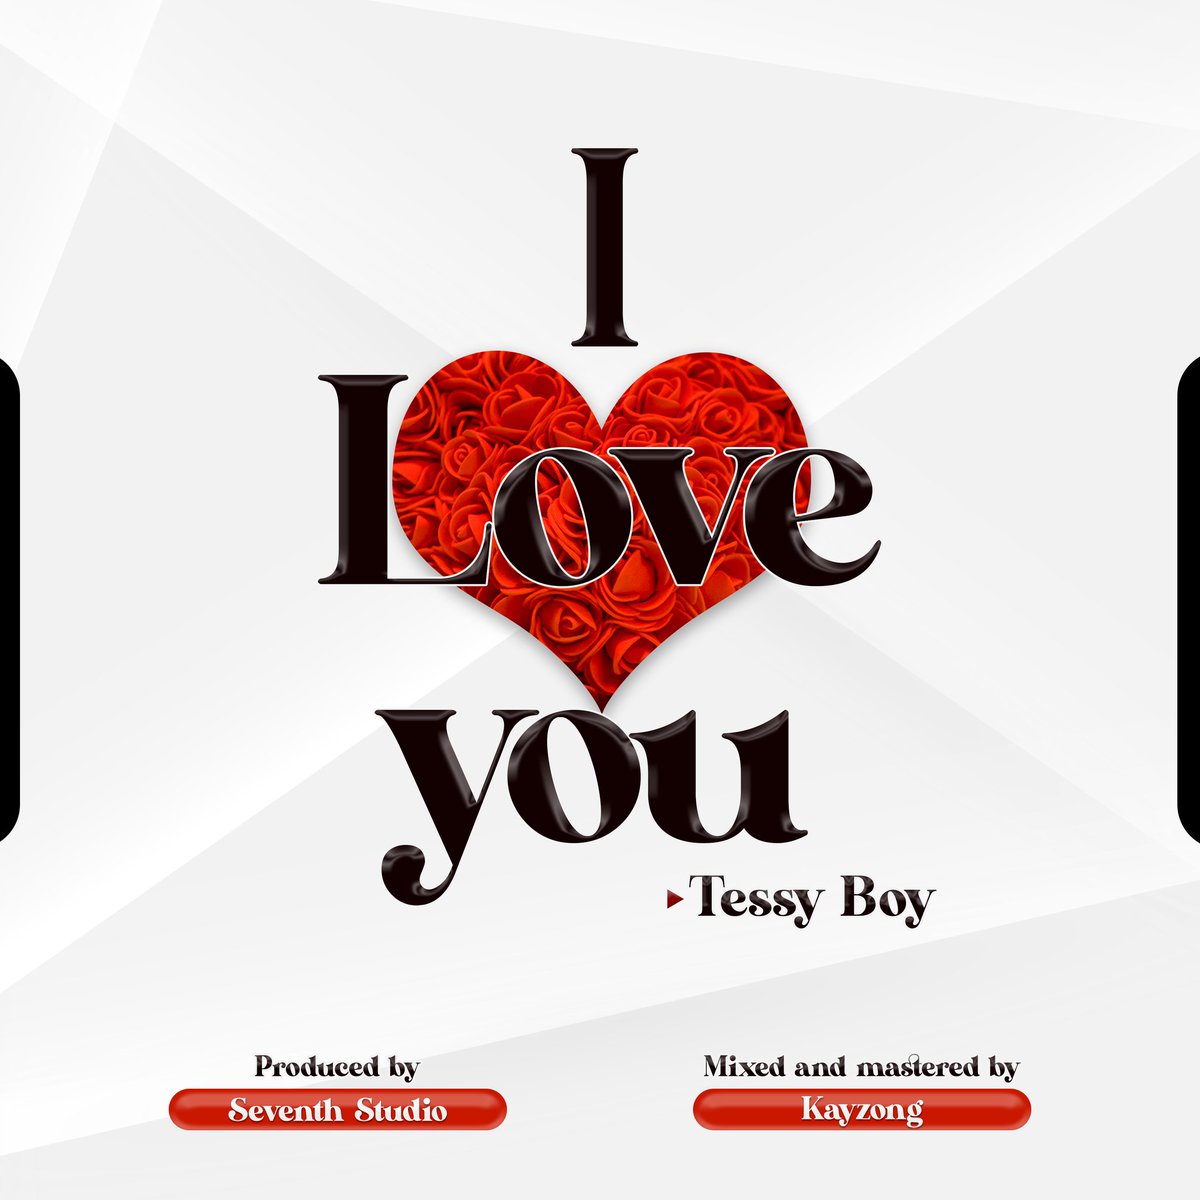 *I NEED TO LET YOU KNOW THAT THIS NEW SONG (I LOVE YOU) BY TESSY BOY * is set to be drop on *FEB 14TH* SOME DAY'S TO GO PLEASE🙏 REPOST AND ANTICIPATE 
@dejohncatalyst @fhesty_Gee 
@HG2films @toluejire @GaozuOfficial @trichi_nbv @TimmyKeyz @MrGoody_ @Yemythyy @am_jugush